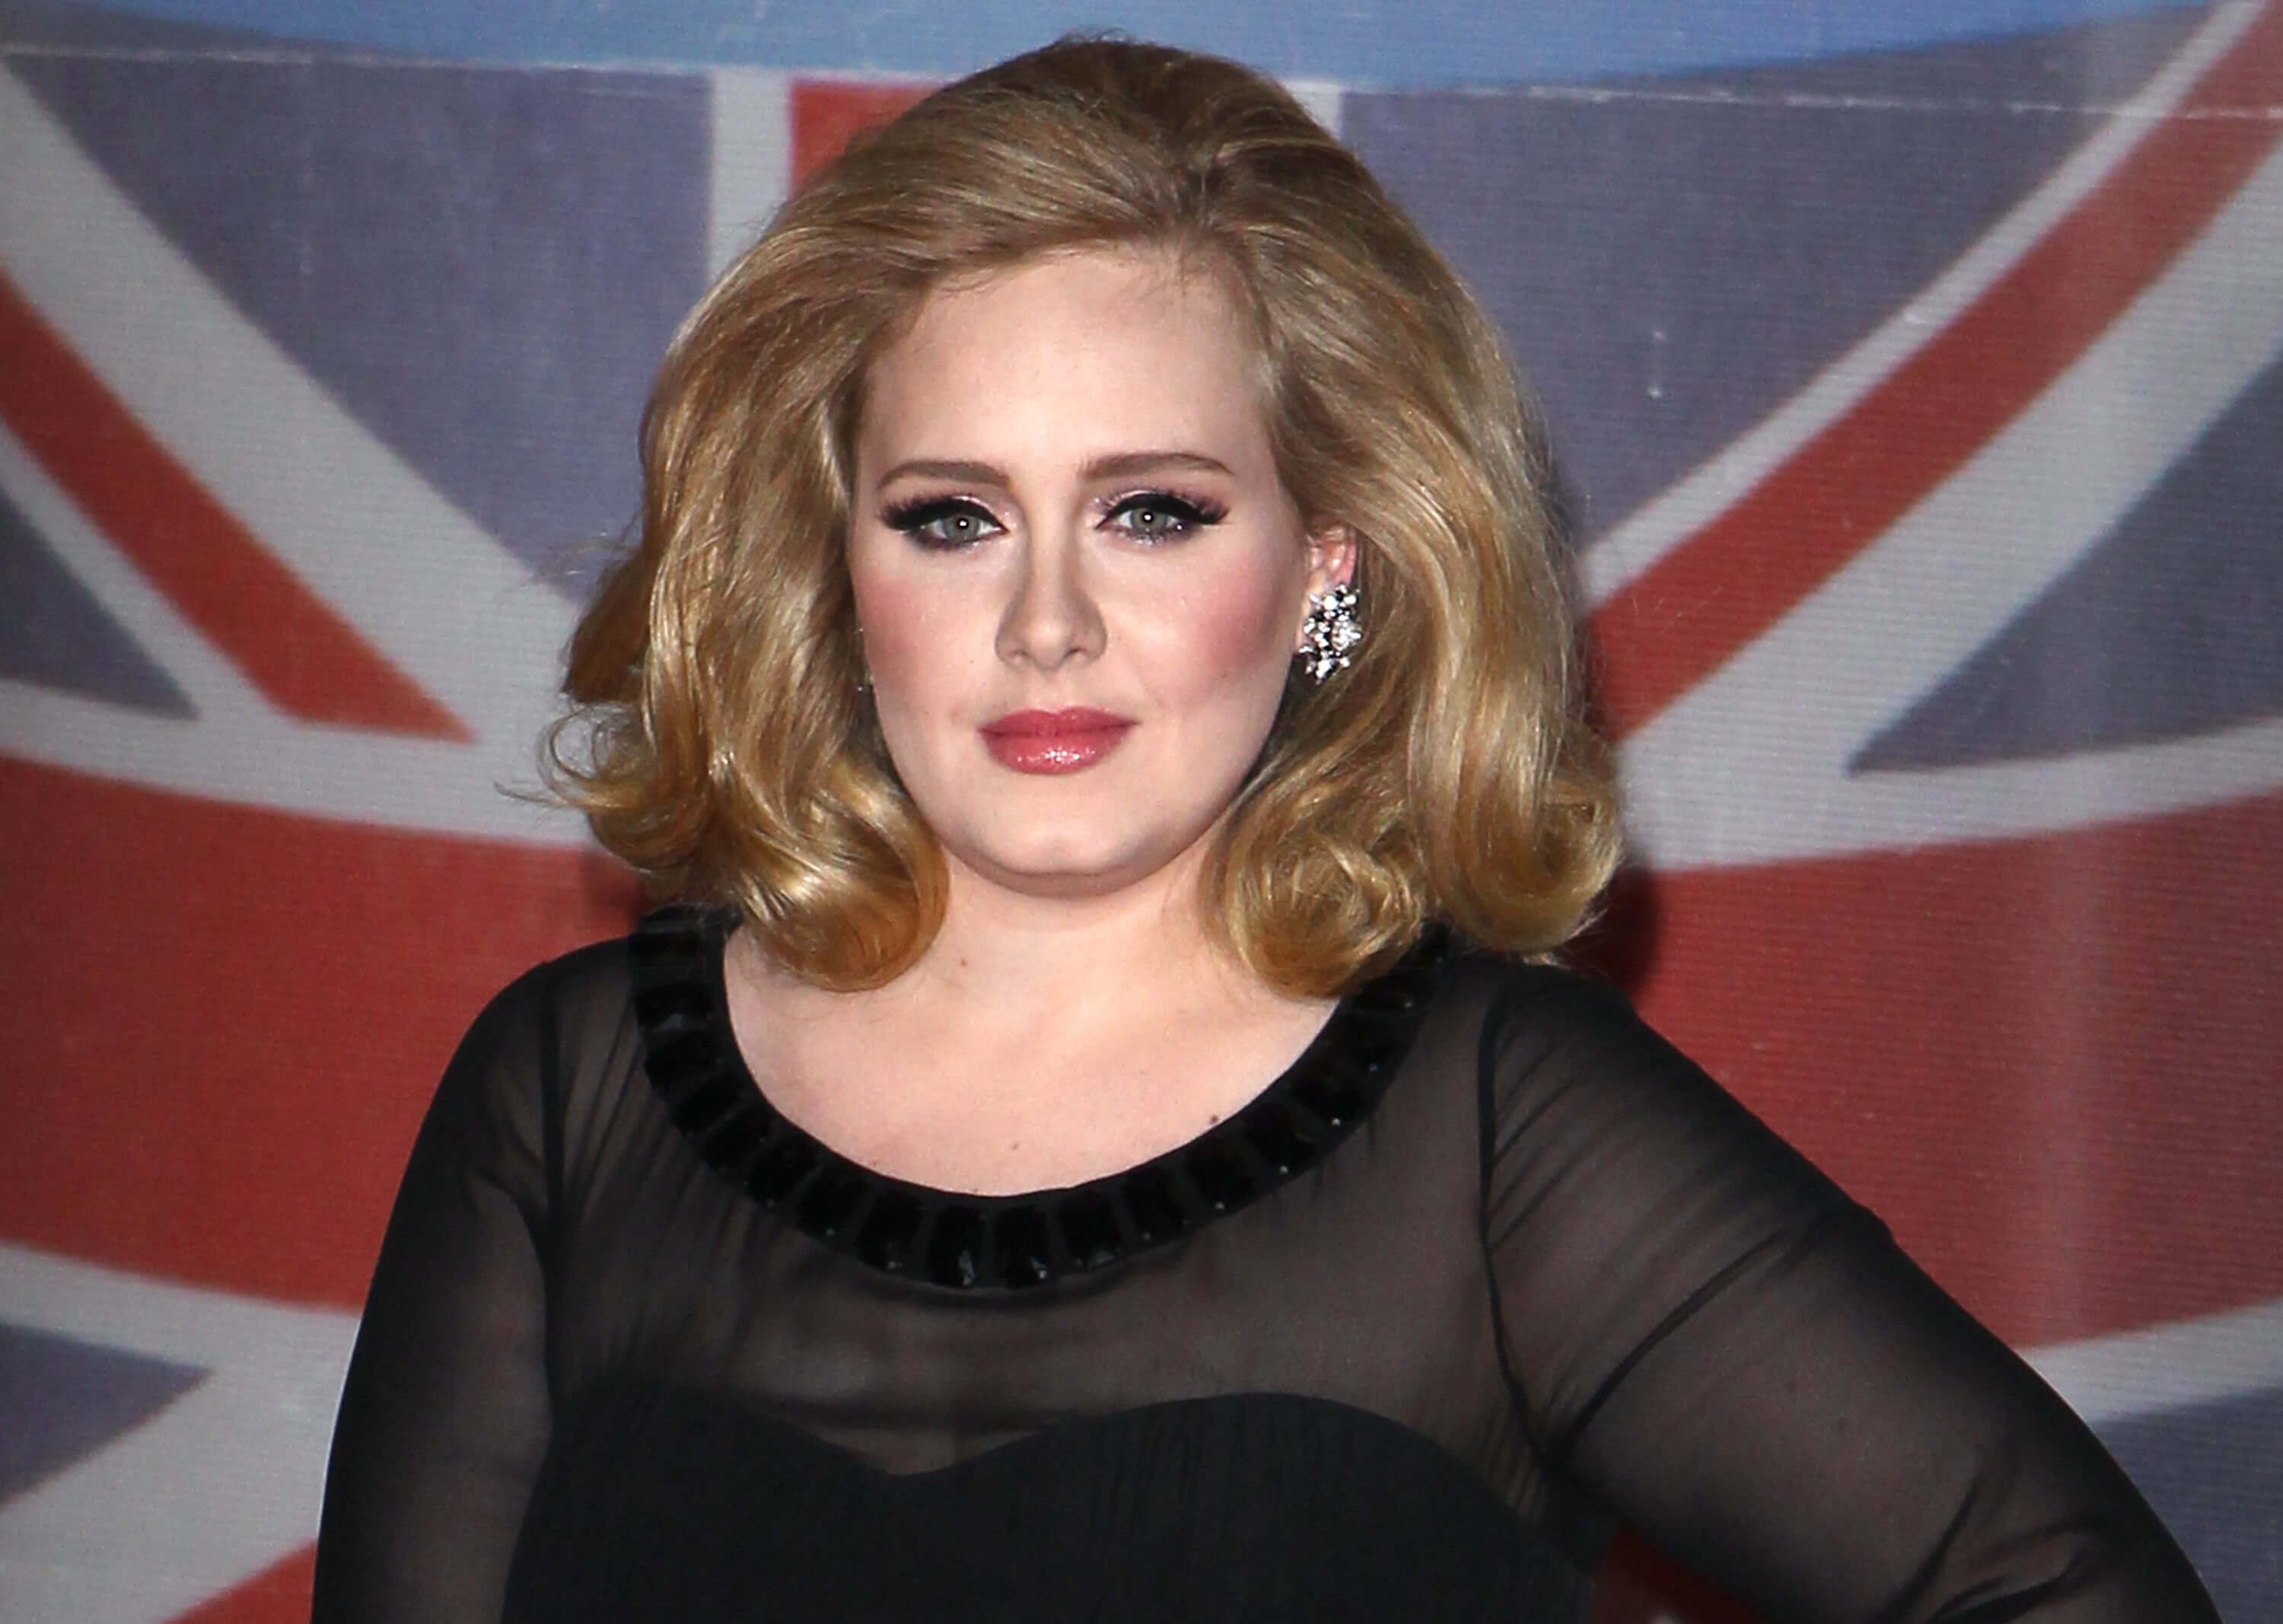 "Rumour Has It" singer Adele with a Union Jack